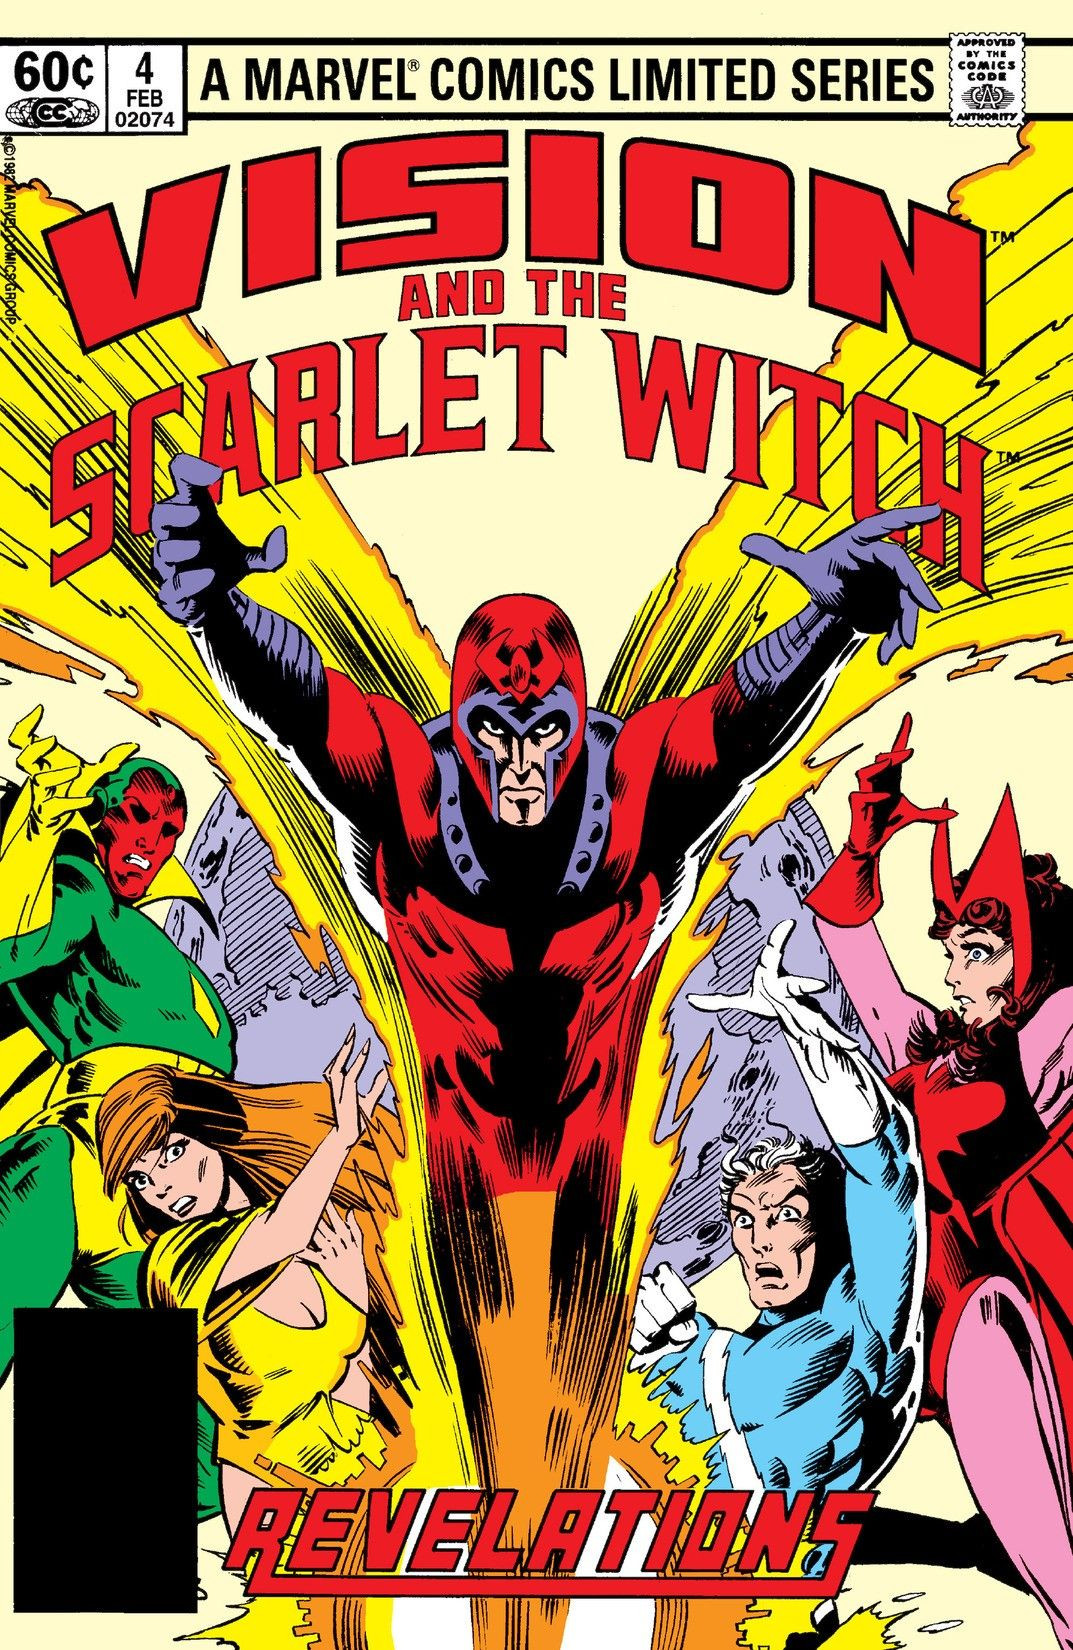 Scarlet Witch #1 - Comic Book Preview